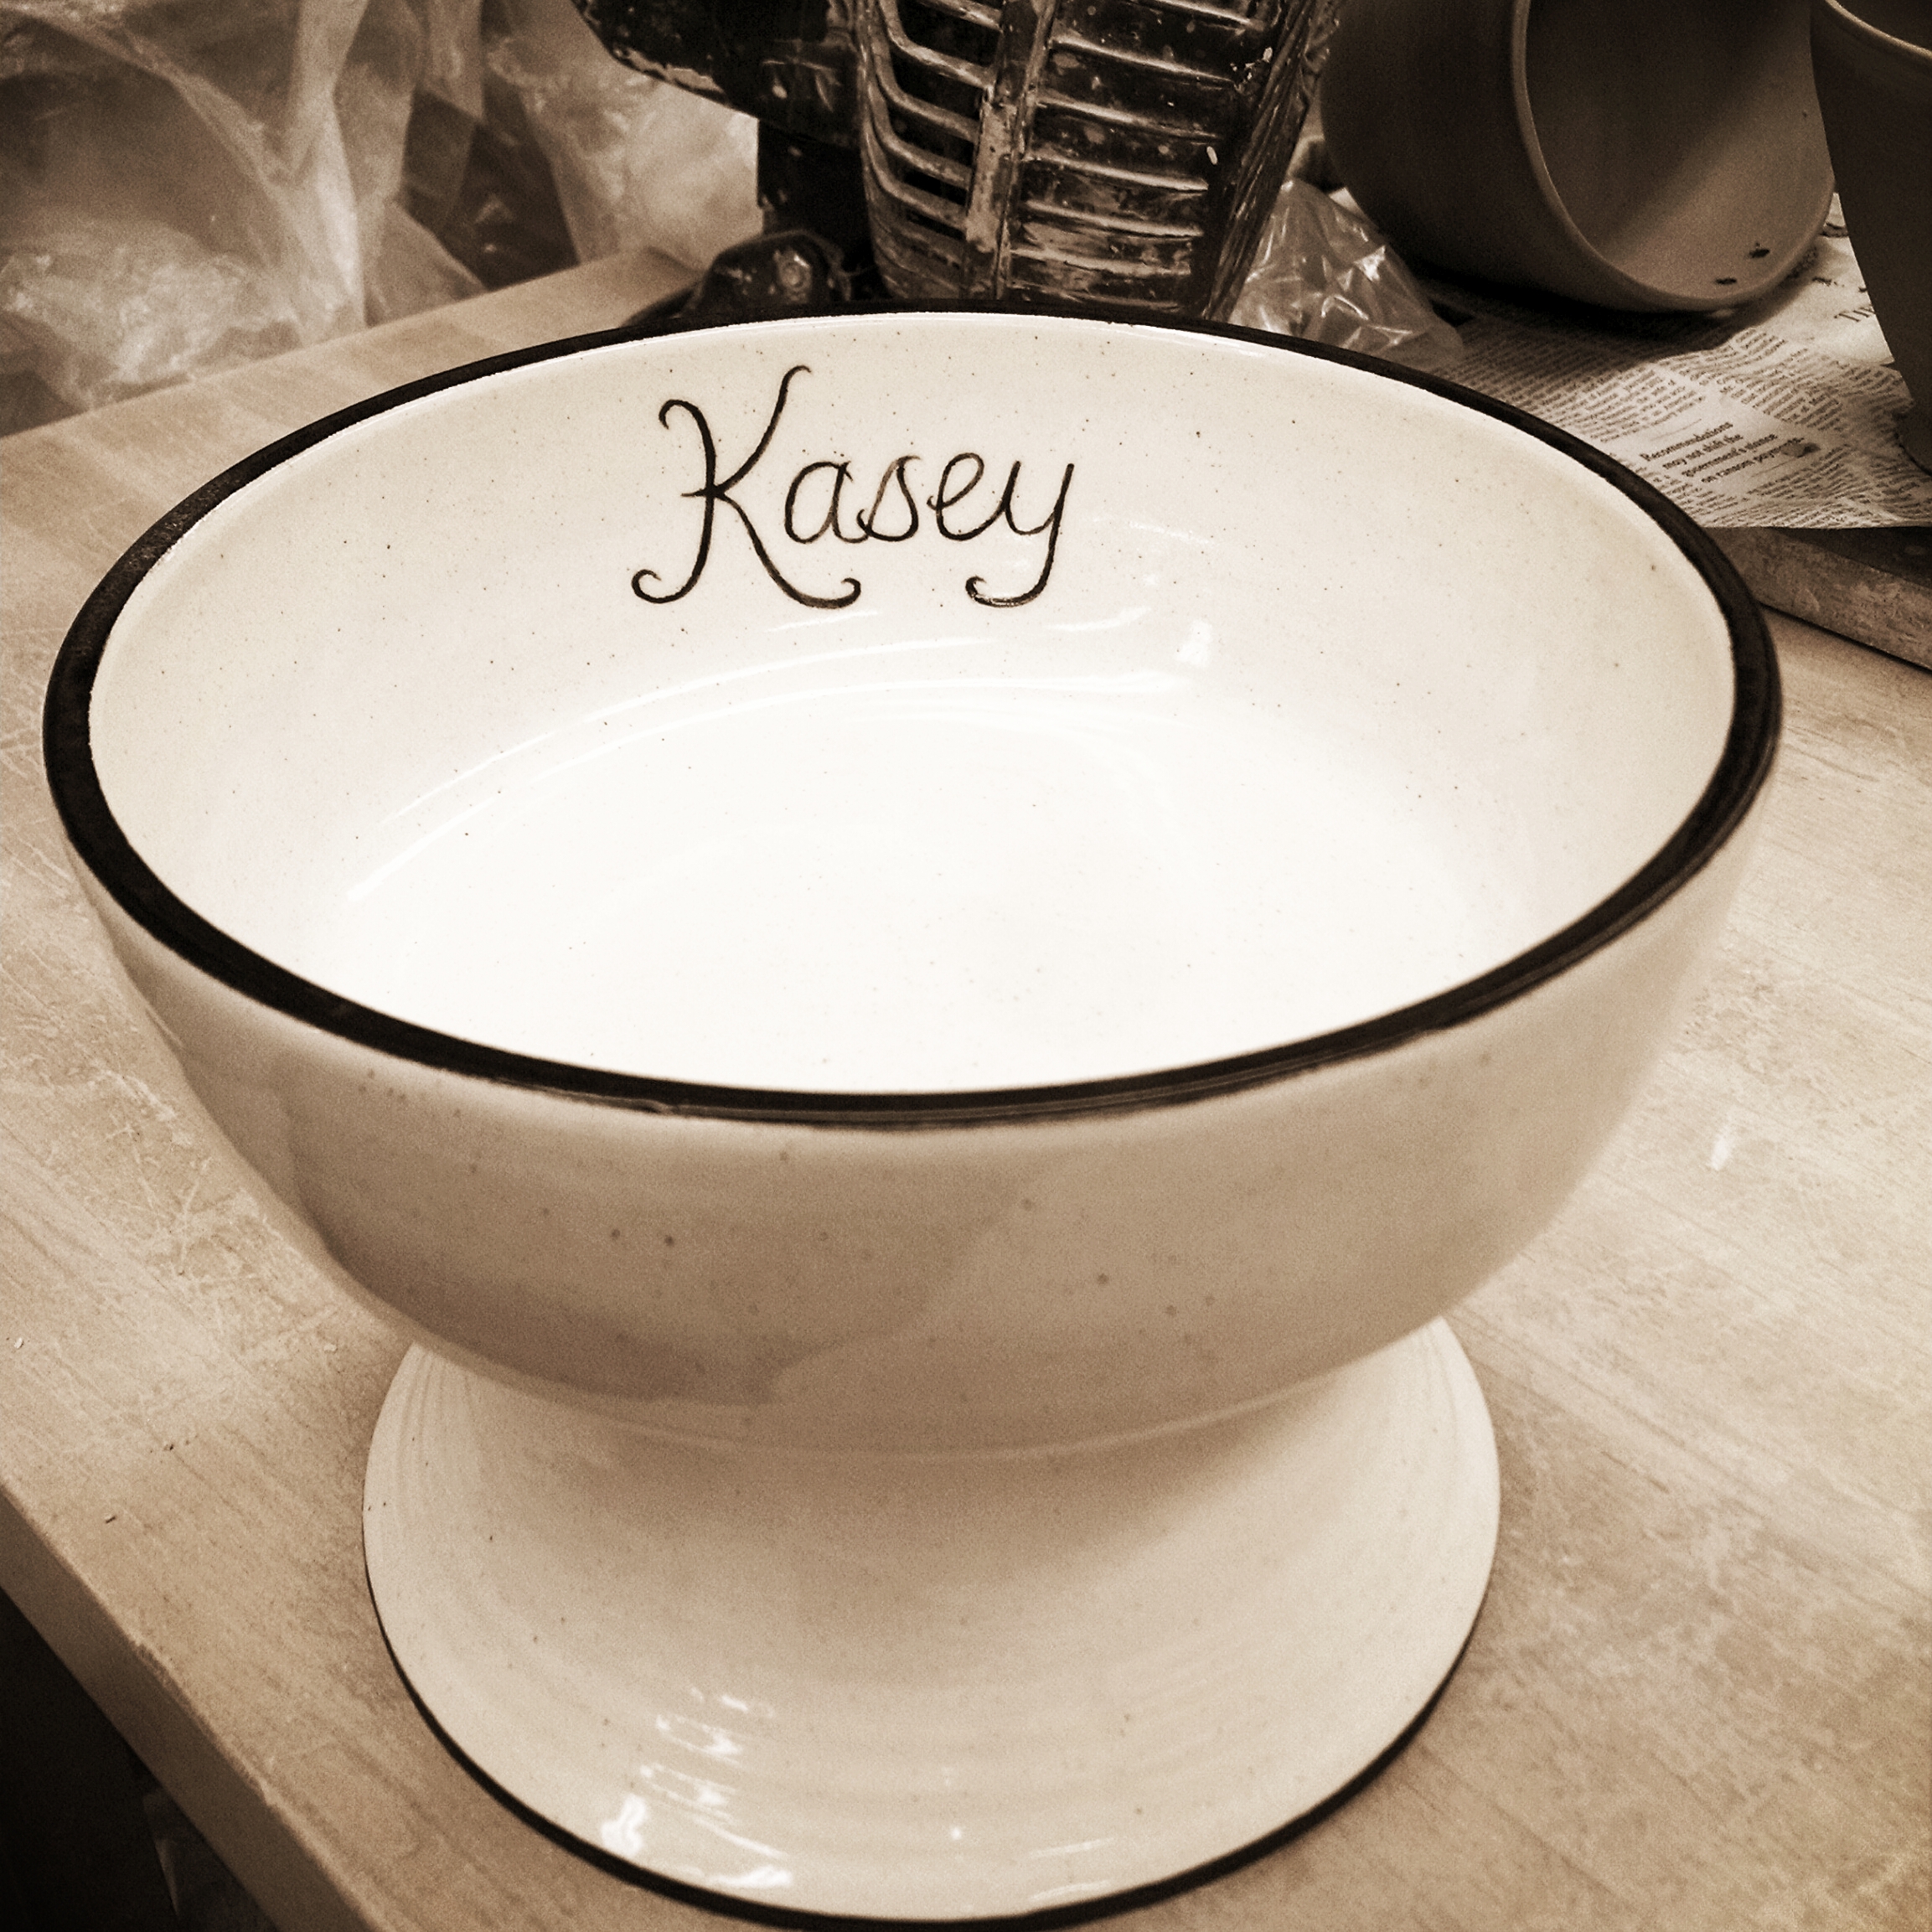 XL Handmade Pedestal Dog Bowl, Wheel-thrown Porcelain Personalized with Your Dog's Name